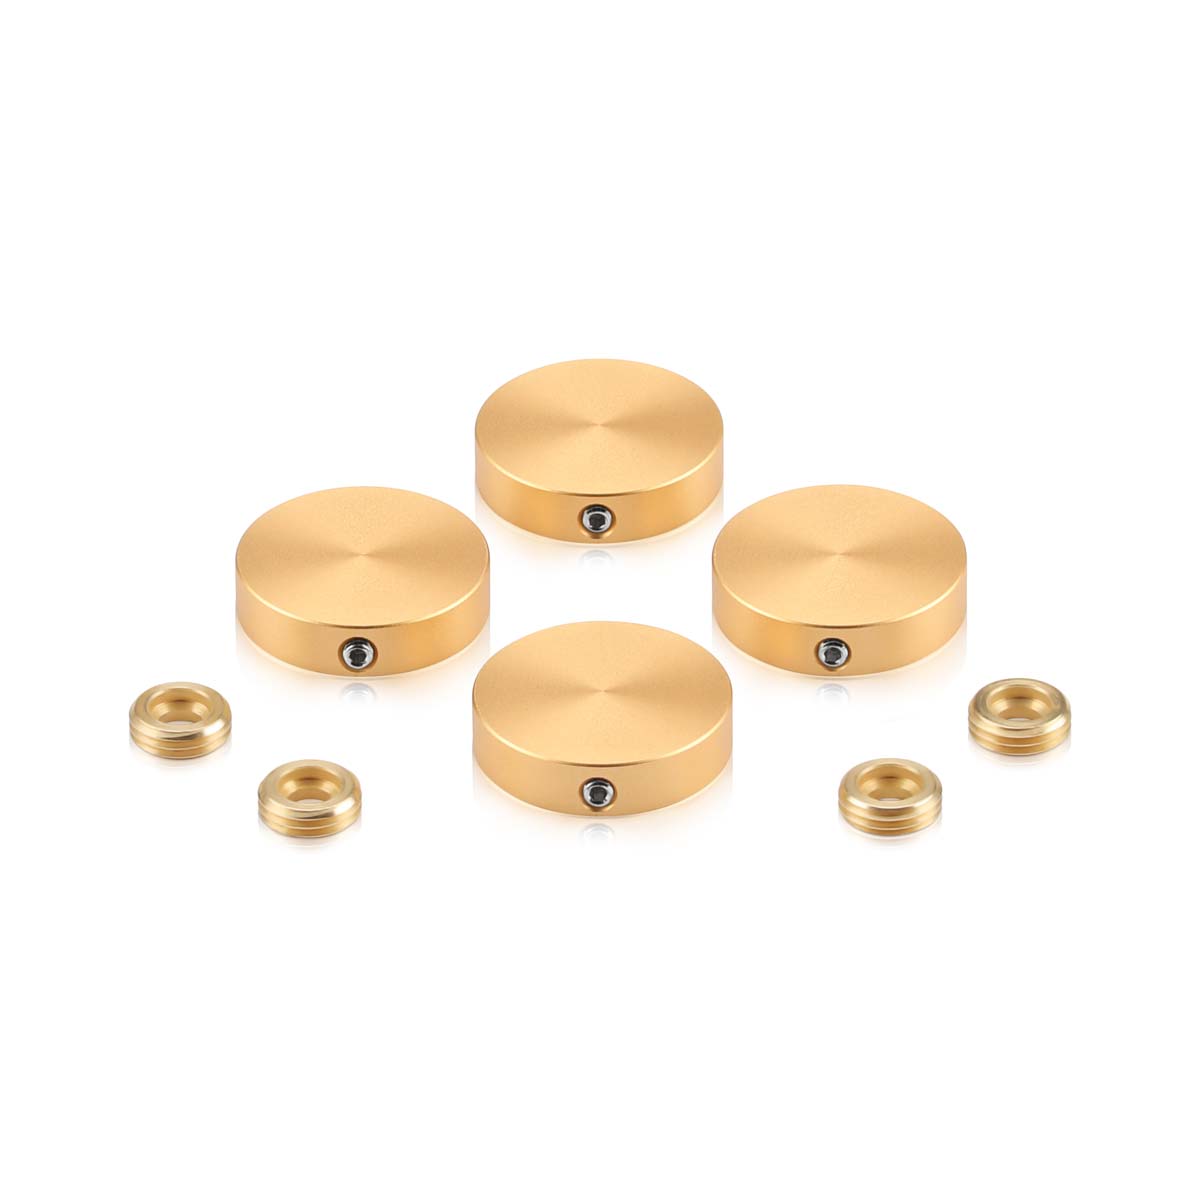 Set of 4 Locking Screw Cover, Diameter: 1'', Aluminum Champagne Anodized Finish, (Indoor or Outdoor Use)